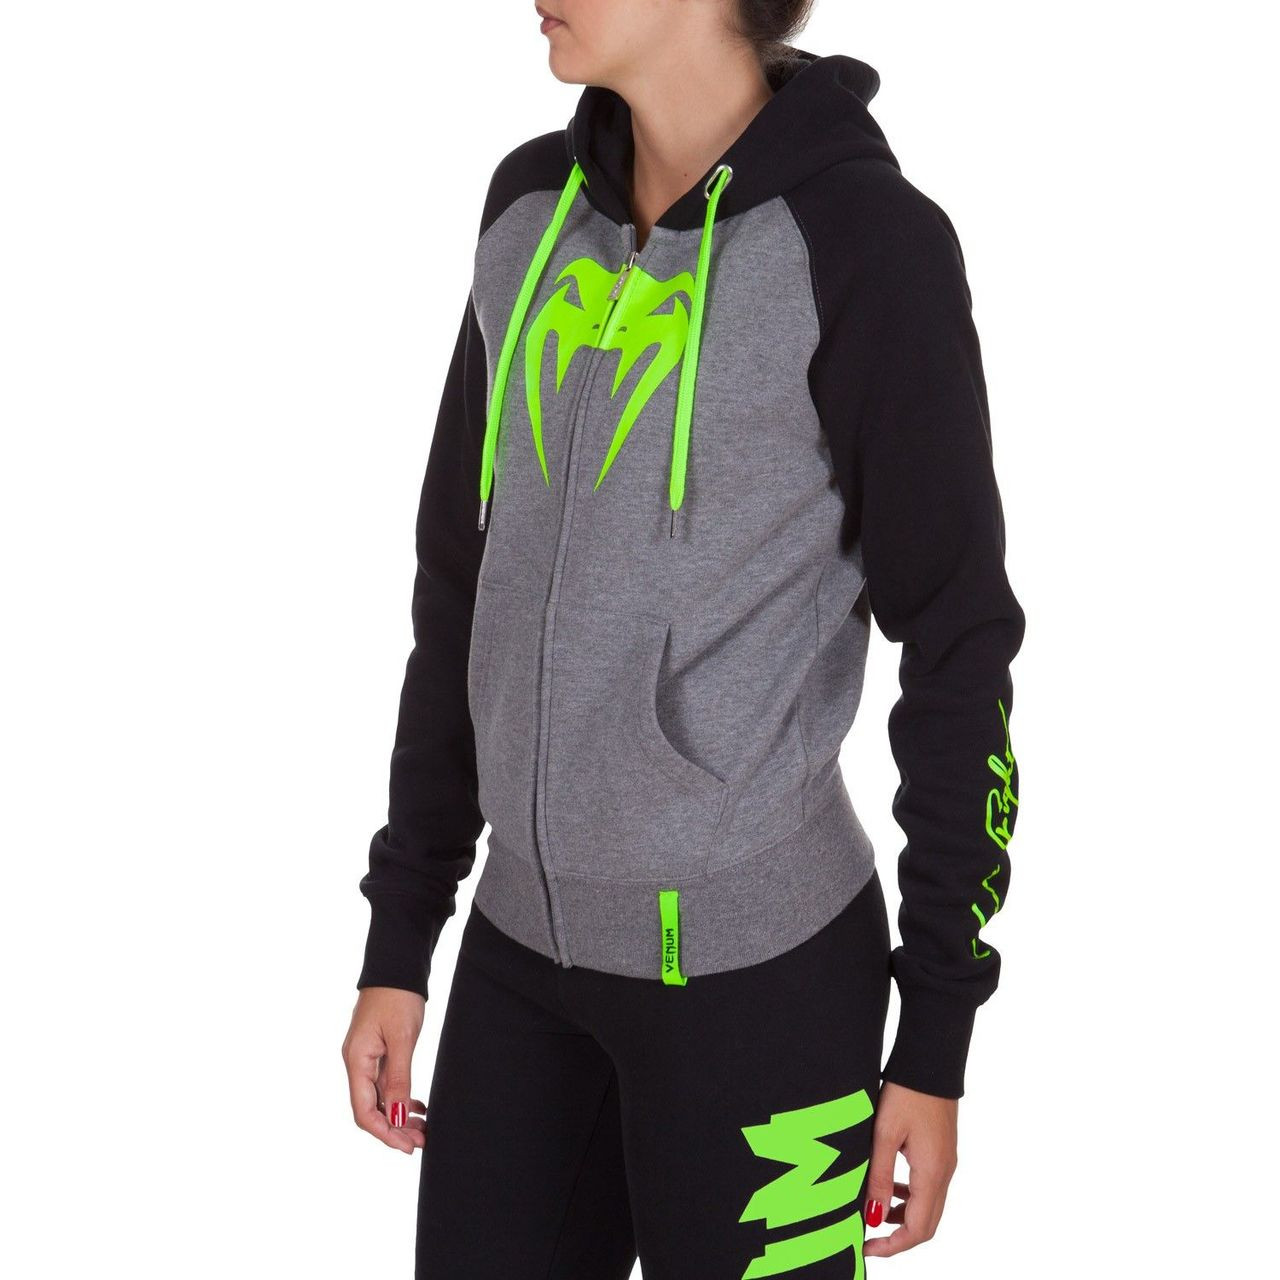 Venum Infinity Hoody designed for women.  Available at www.thejiujitsushop.com

Order now for free shipping across the store!